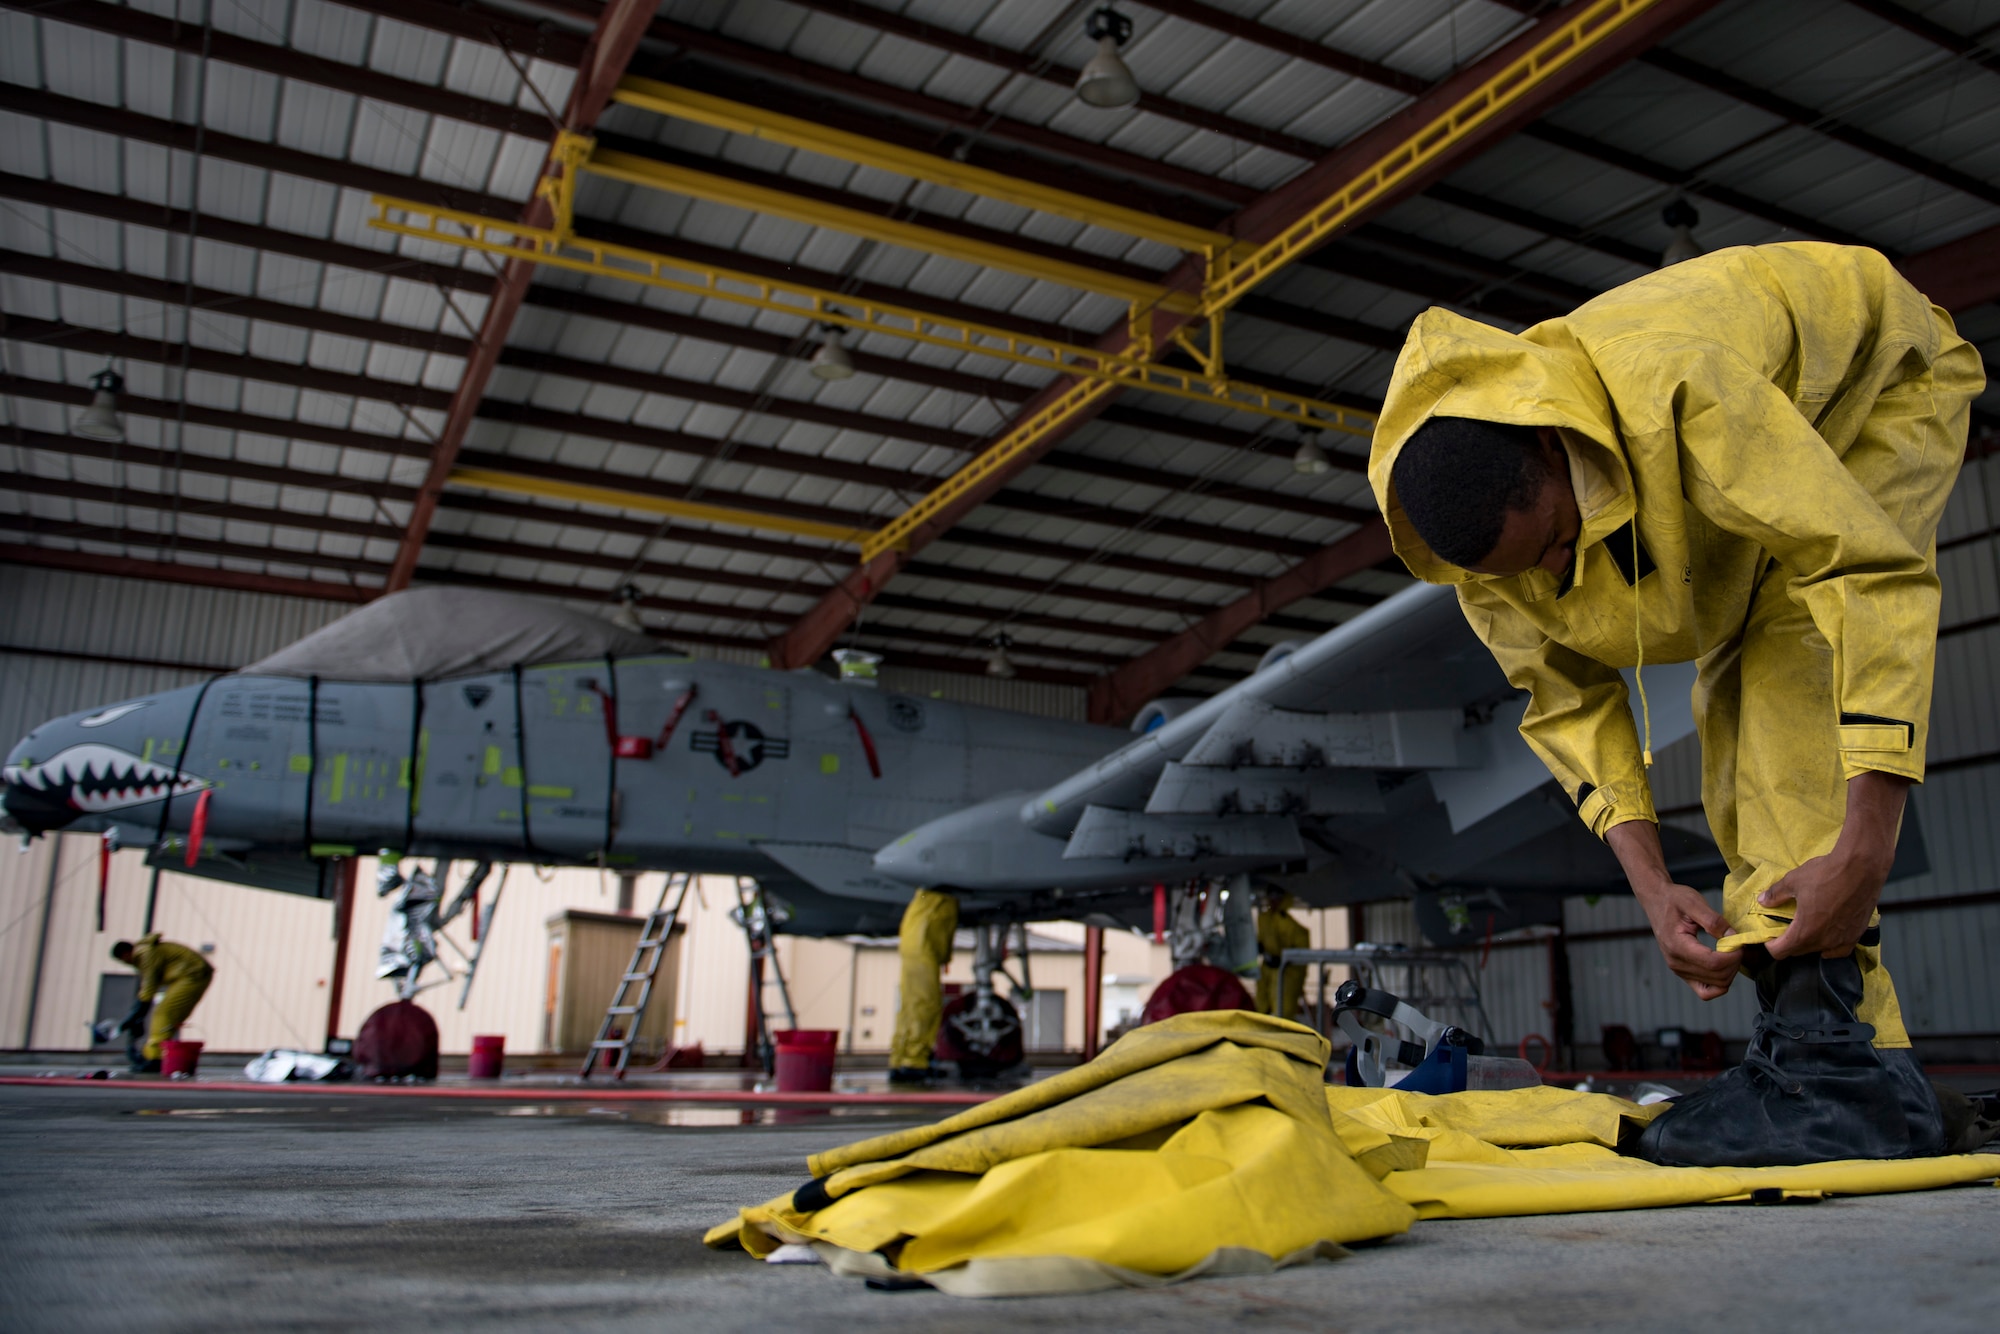 Airman 1st Class Michael Wilson-Jones, 23d Aircraft Maintenance Squadron 75th Aircraft Maintenance Unit electrical and environmental technician, dawns personal protective equipment before washing an A-10C Thunderbolt II, Aug. 28, 2017, at Moody Air Force Base, Ga. Maintenance procedures require that A-10s are washed at least every 180 days to prevent maintenance issues and safety hazards to the pilot. Since strong chemicals are used to clean the aircraft Airmen must wear personal protective equipment. (U.S. Air Force photo by Airman 1st Class Daniel Snider)